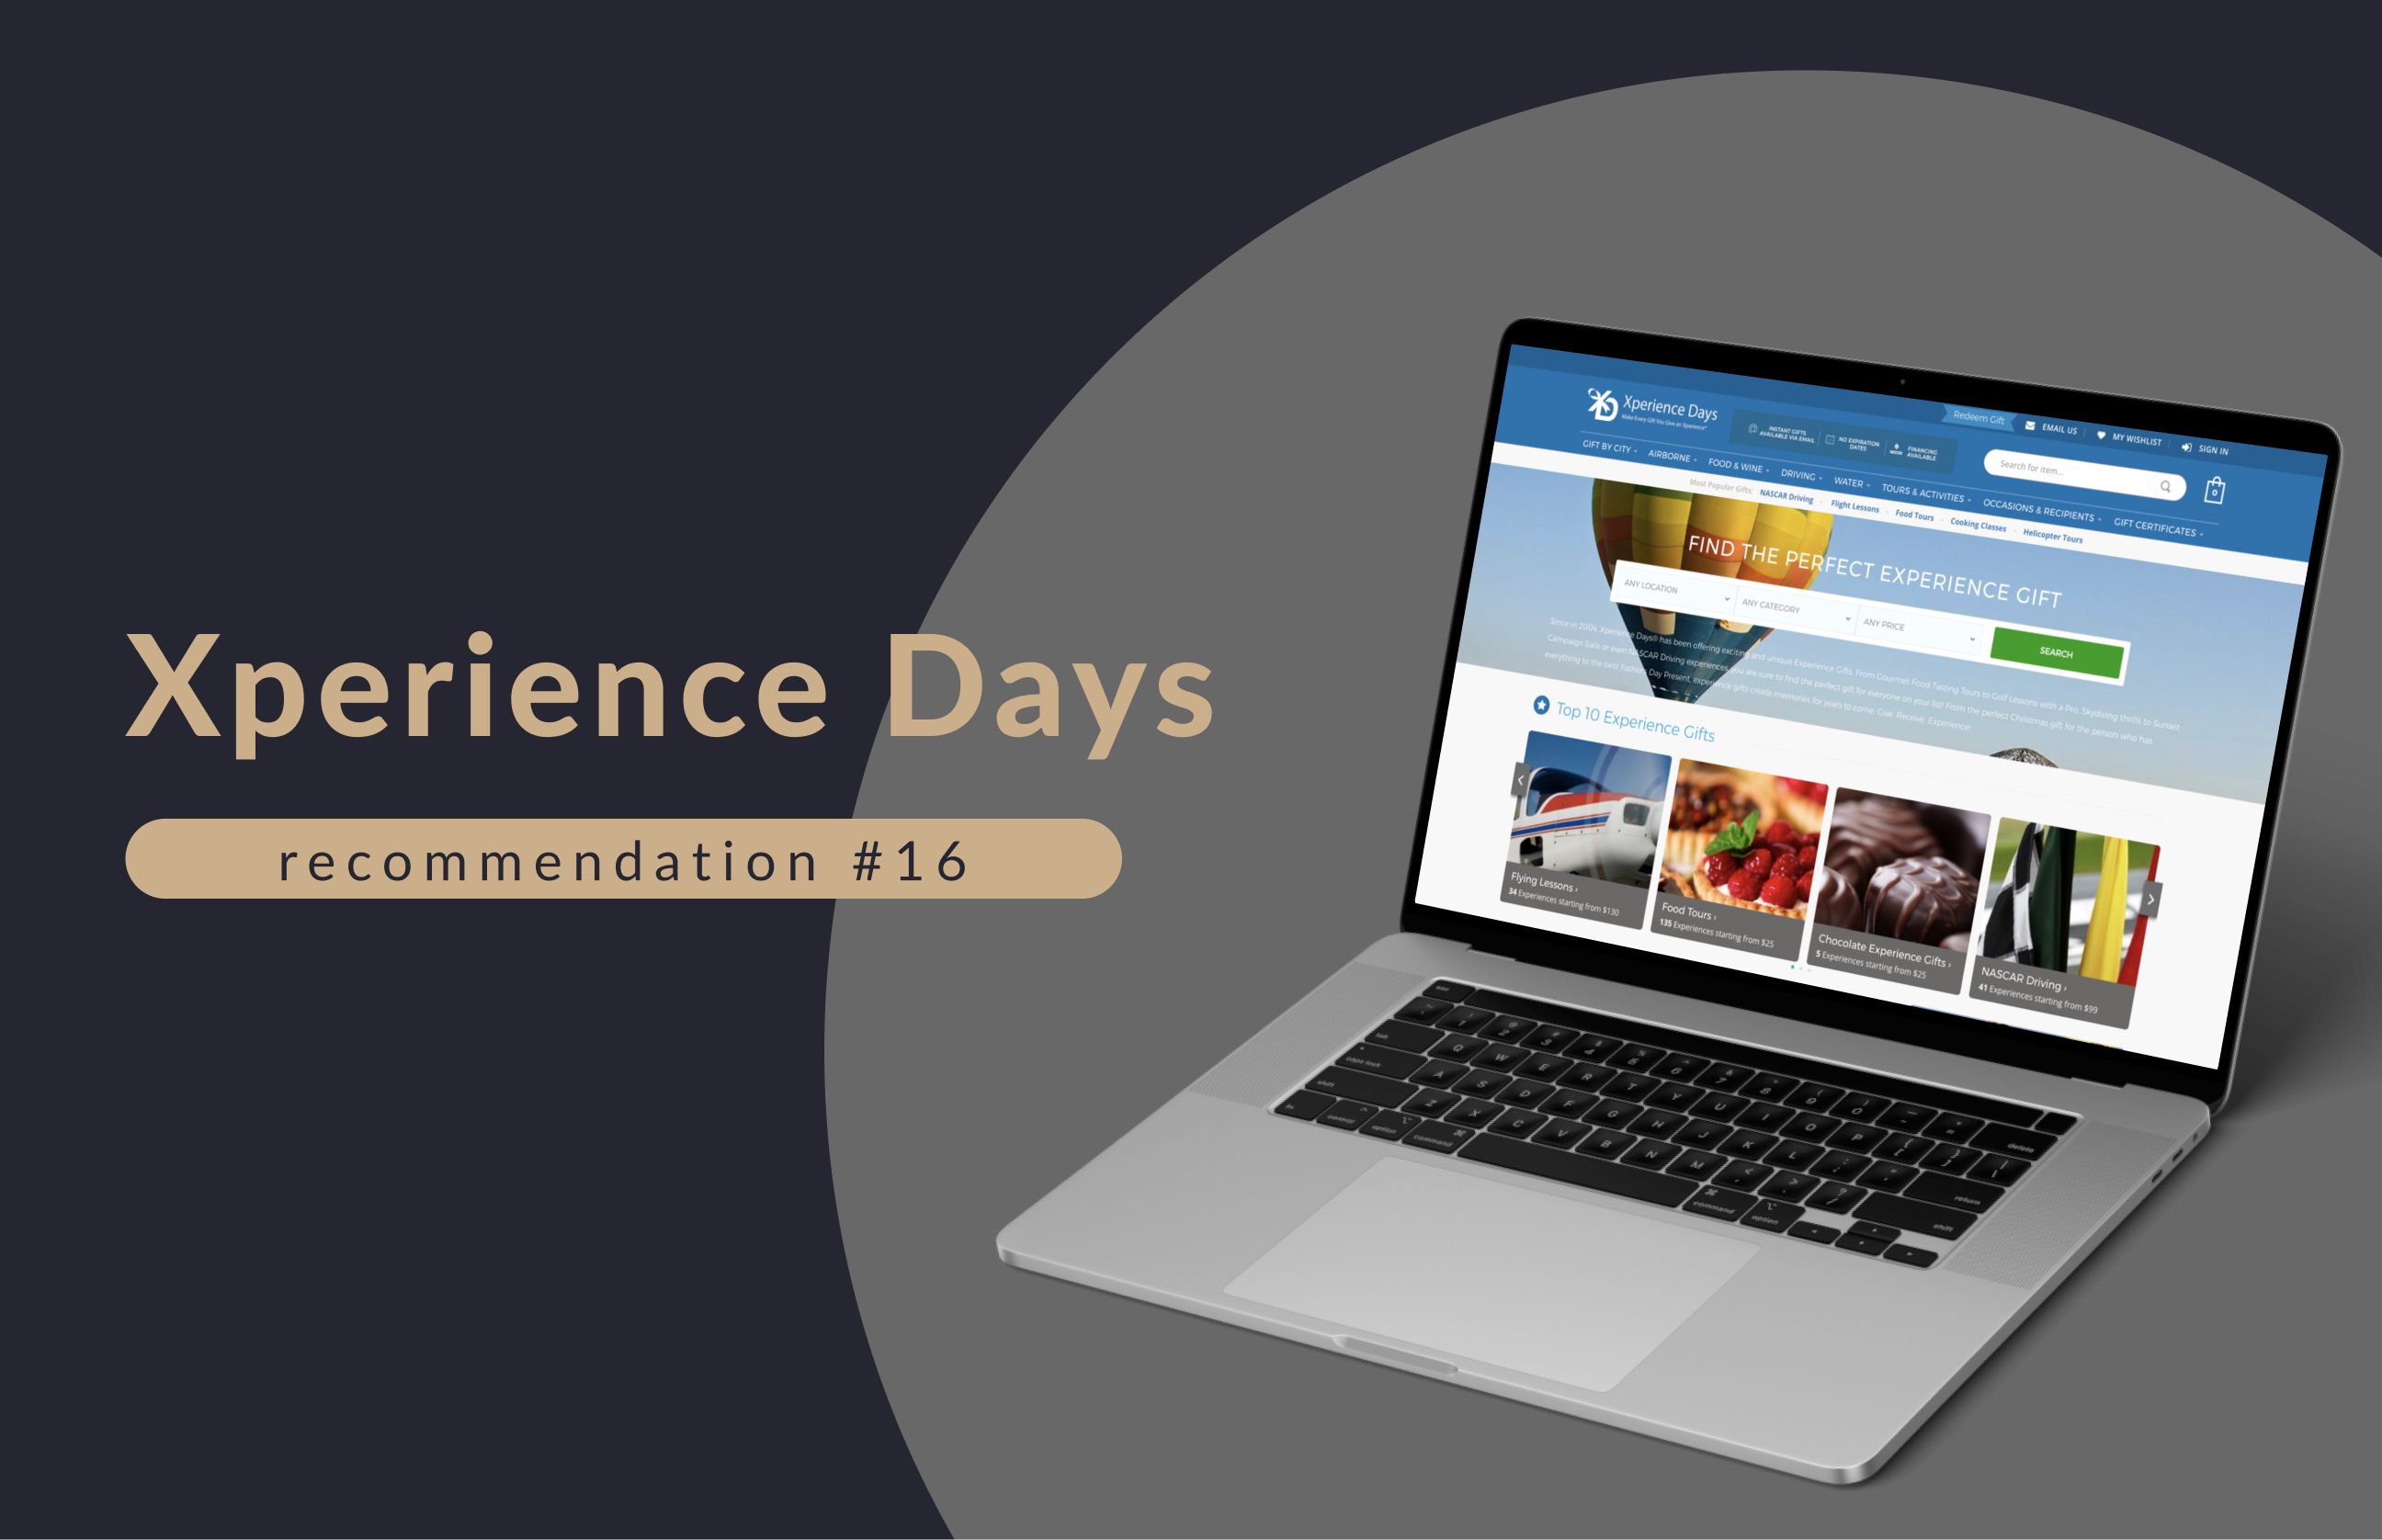 gifting platform recommendation 16 Xperience Days